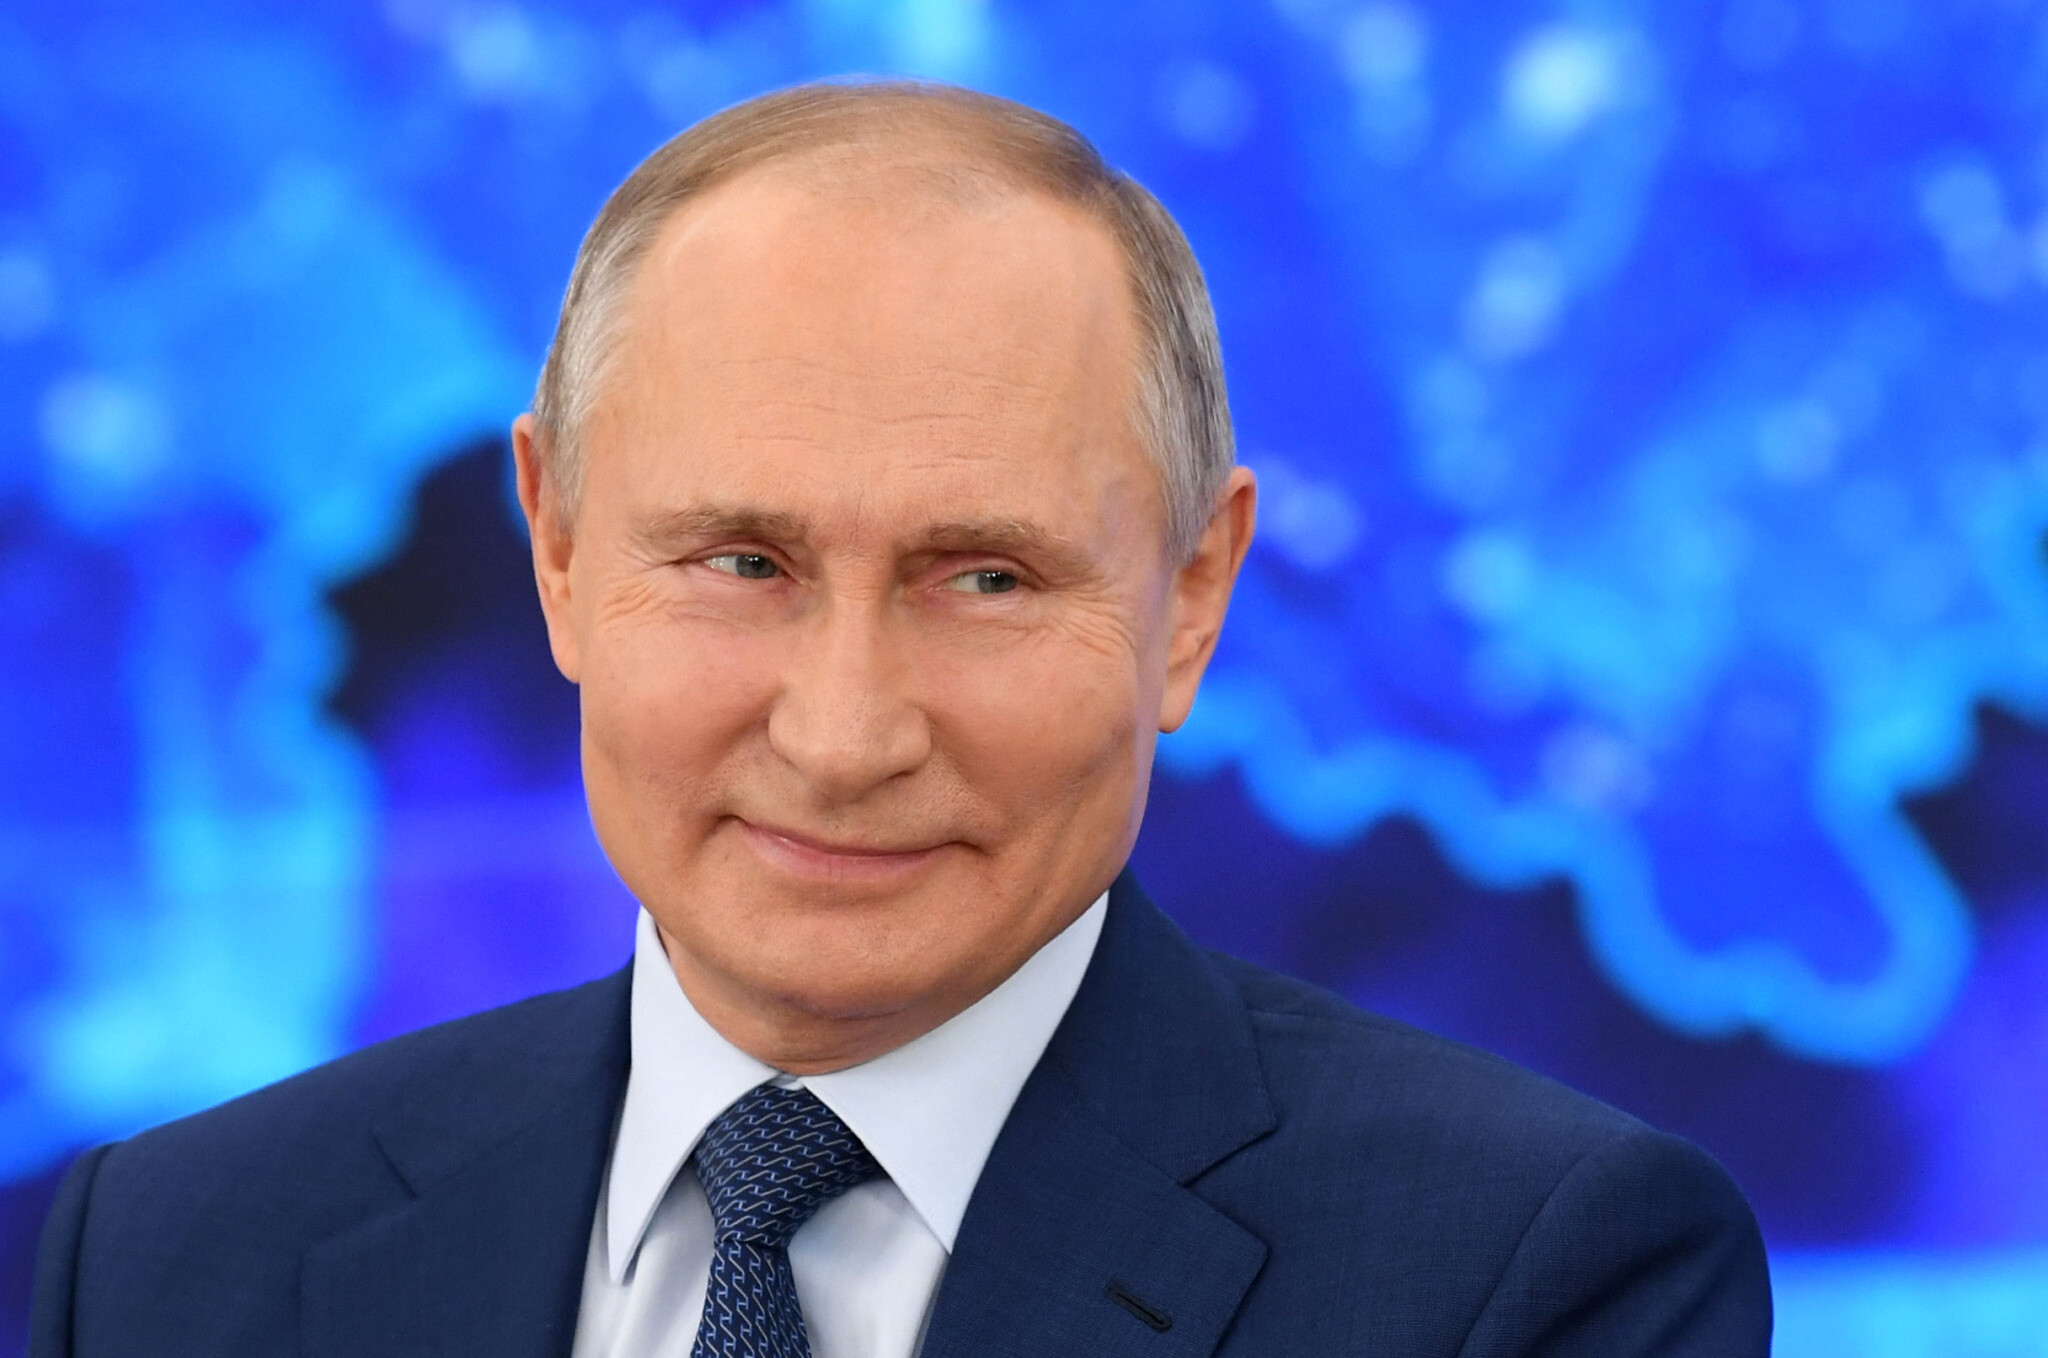 Putin Claims 6th Victory A Closer Look at Russia’s Presidential Elections